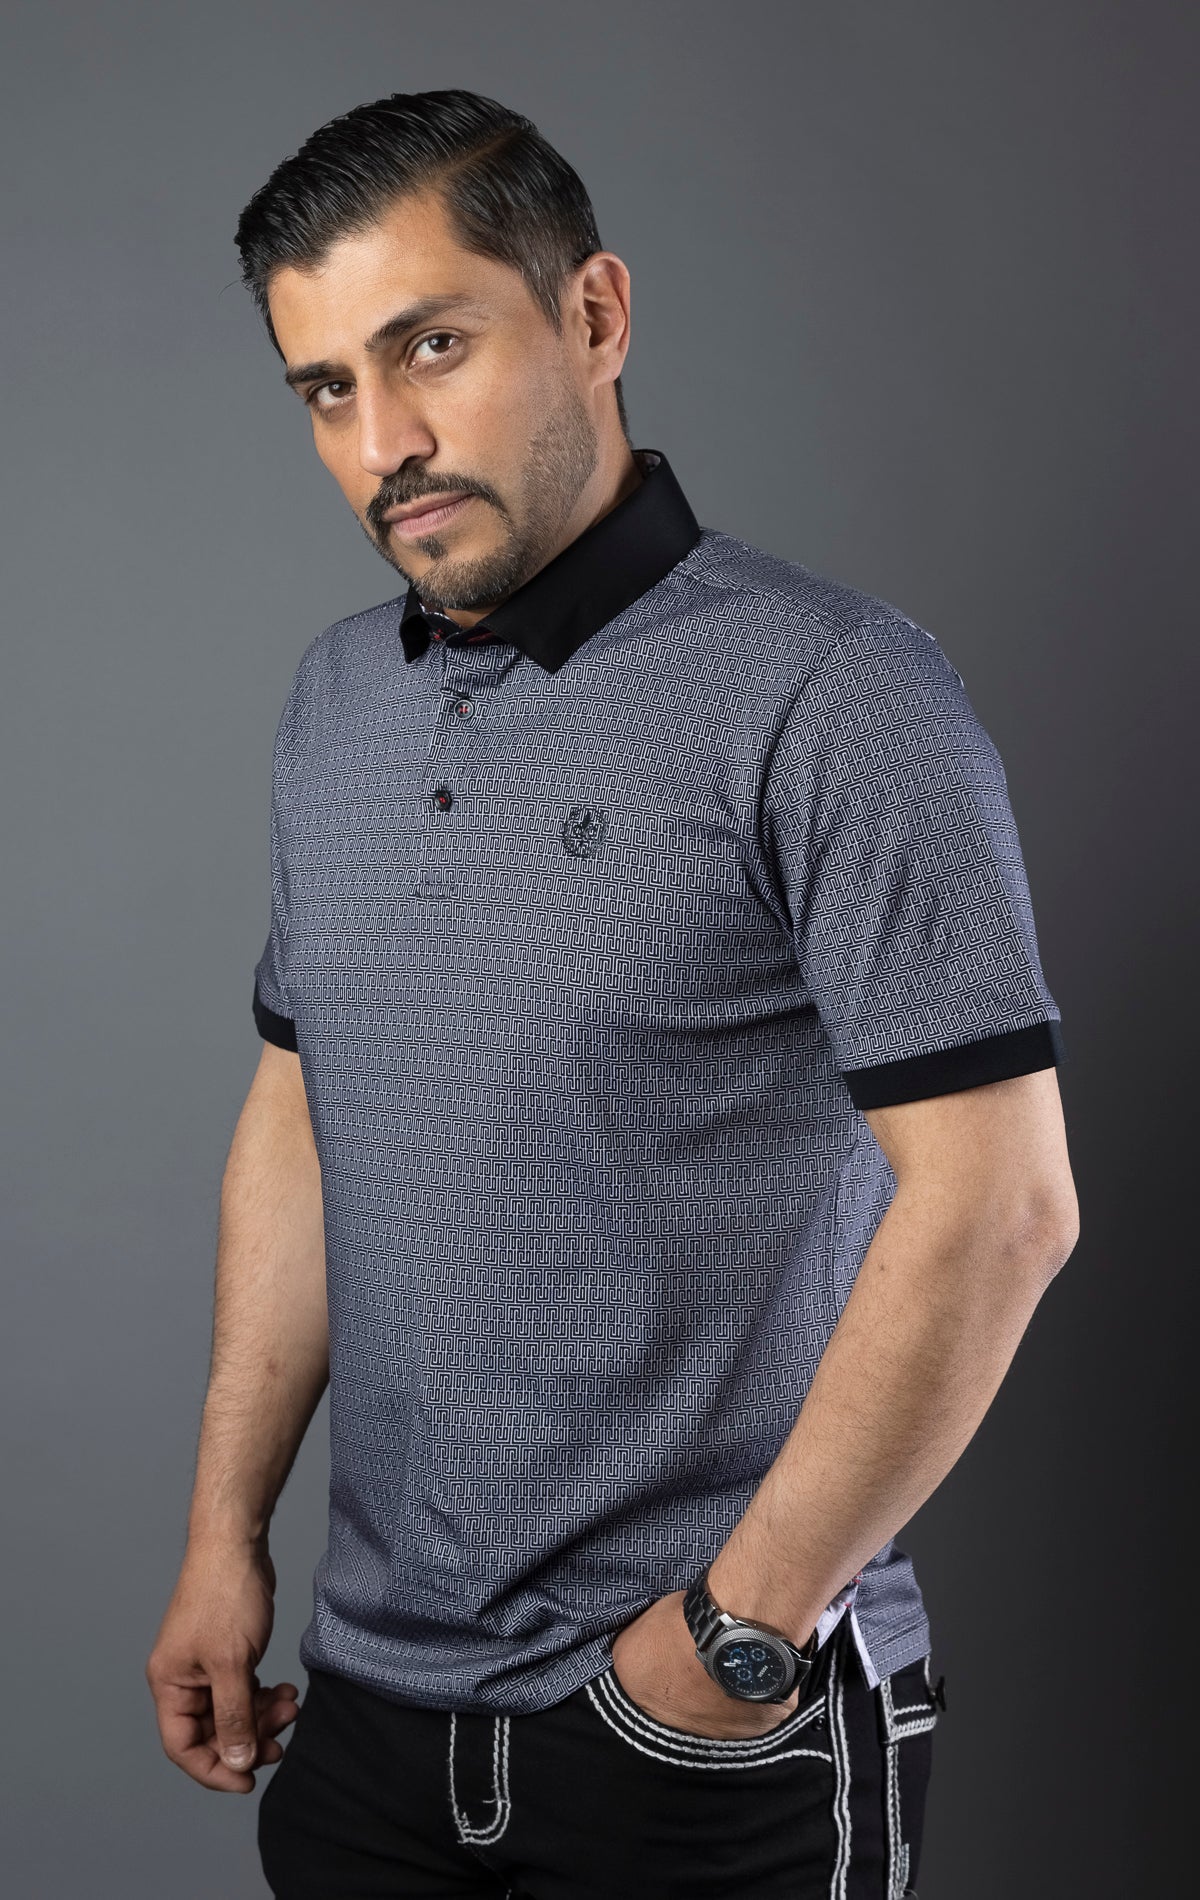 Men's casual dress polo shirt with contrast collar and embroidery, made from high-end 100% mercerized cotton.